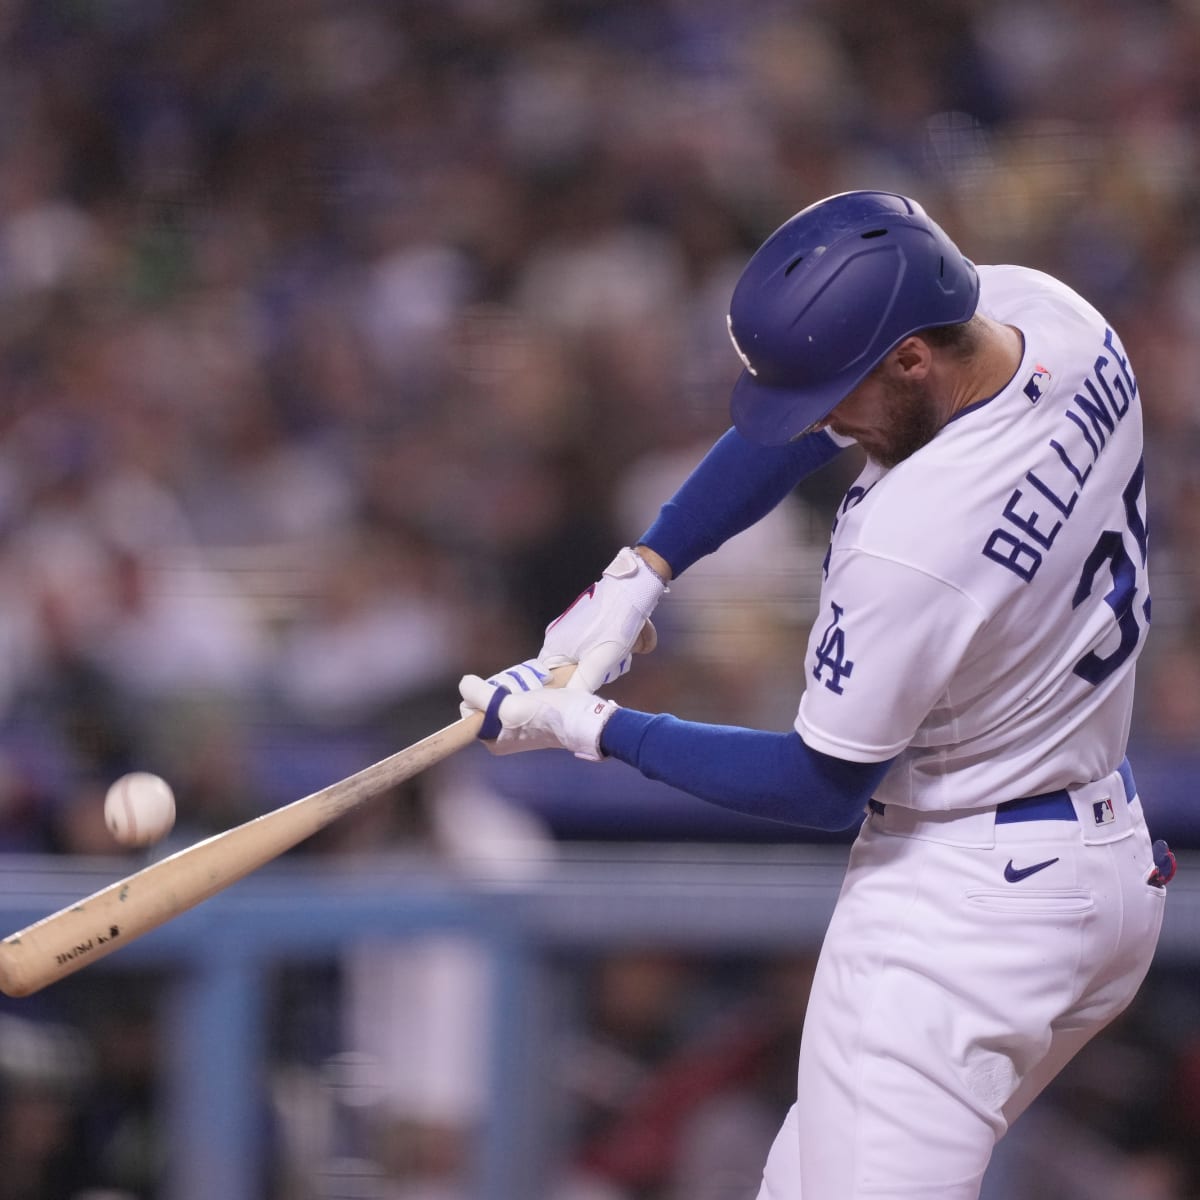 Cody Bellinger may be in line for big deal in MLB free agency